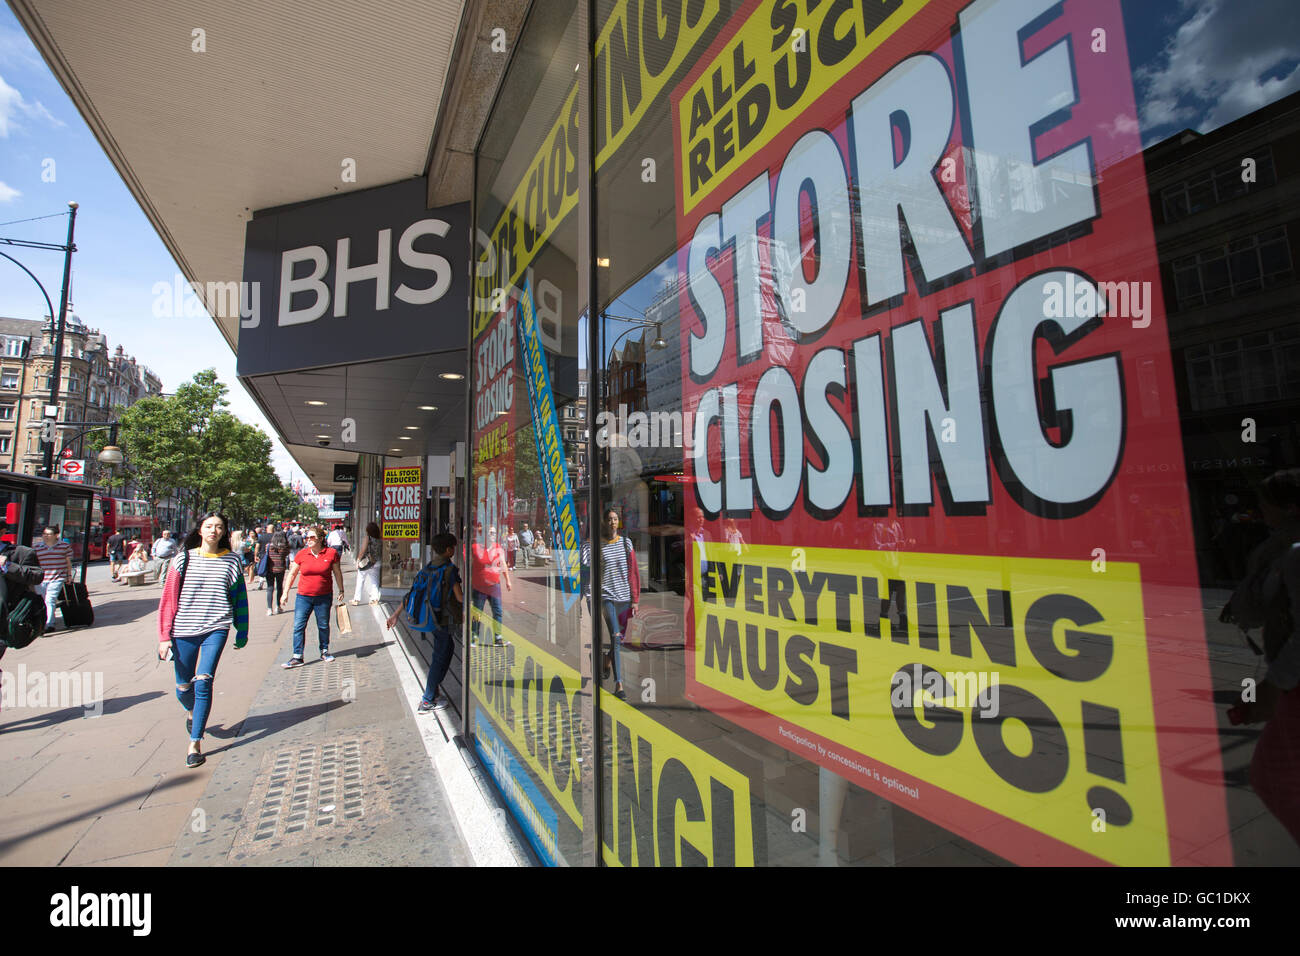 Department store BHS will be wound down with the loss of up to 11,000 jobs after efforts to find a buyer failed, London, UK Stock Photo